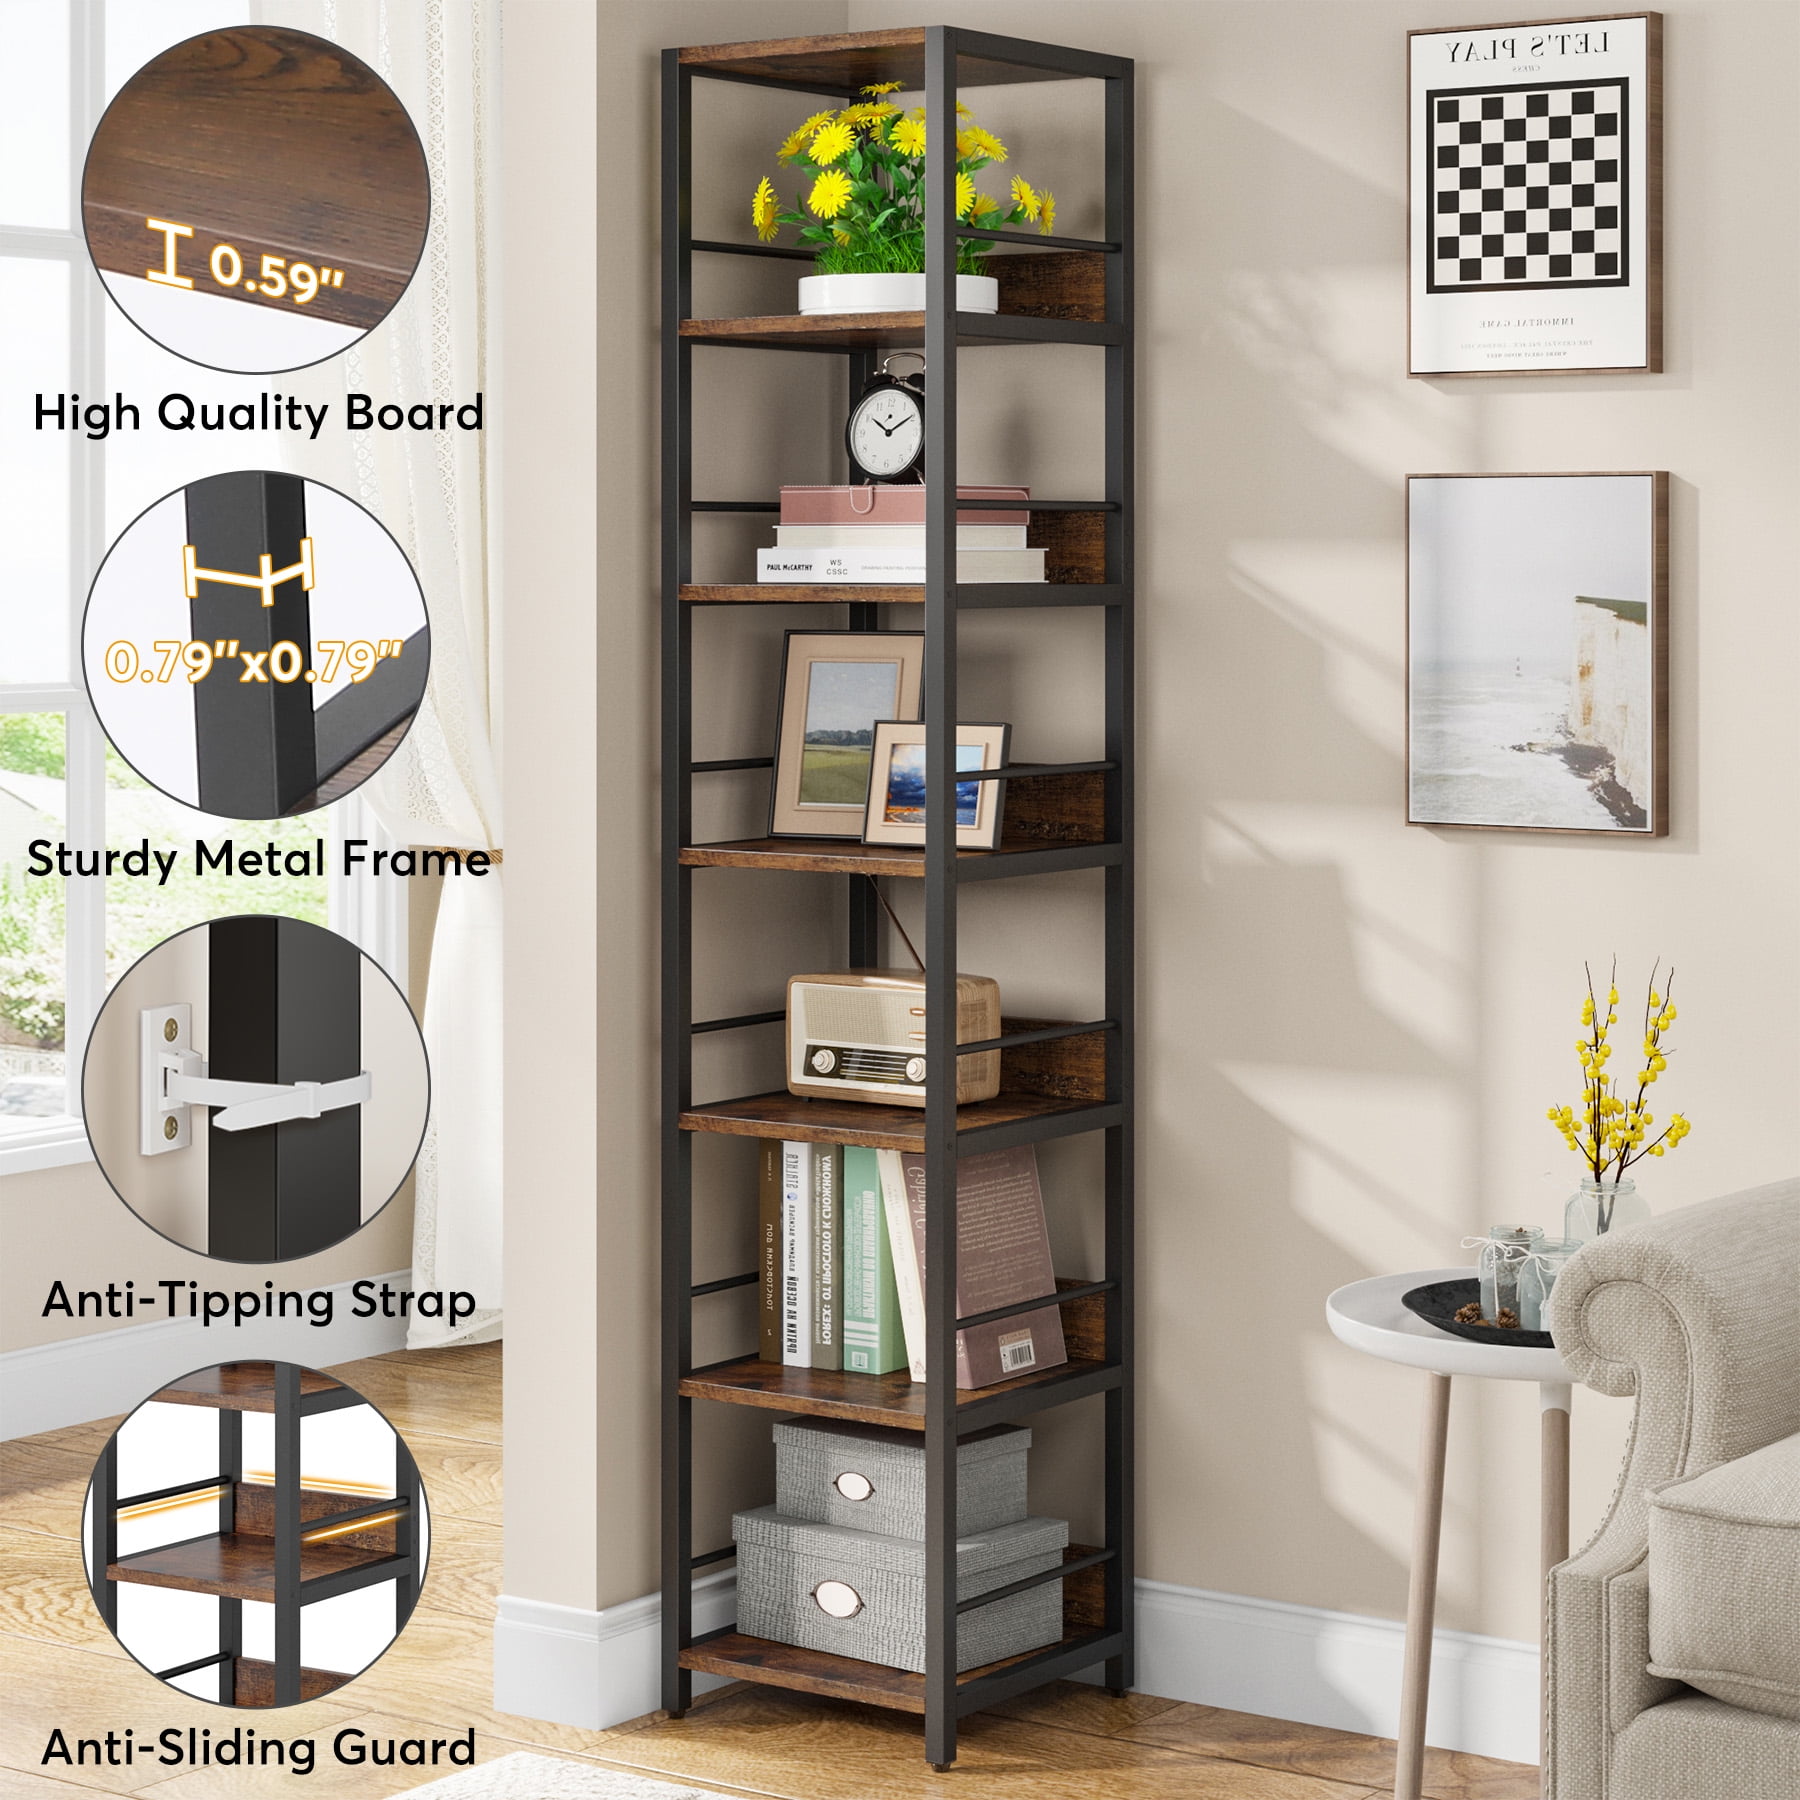 Tribesigns 75 Inch Tall Narrow Bookshelf for Small Spaces, 6-tier  Multipurpose Storage Rack Book Shelves, Rustic Corner Square Shelf Tower, Skinny  Bookcase Display Stand Shelving Units for Home Office